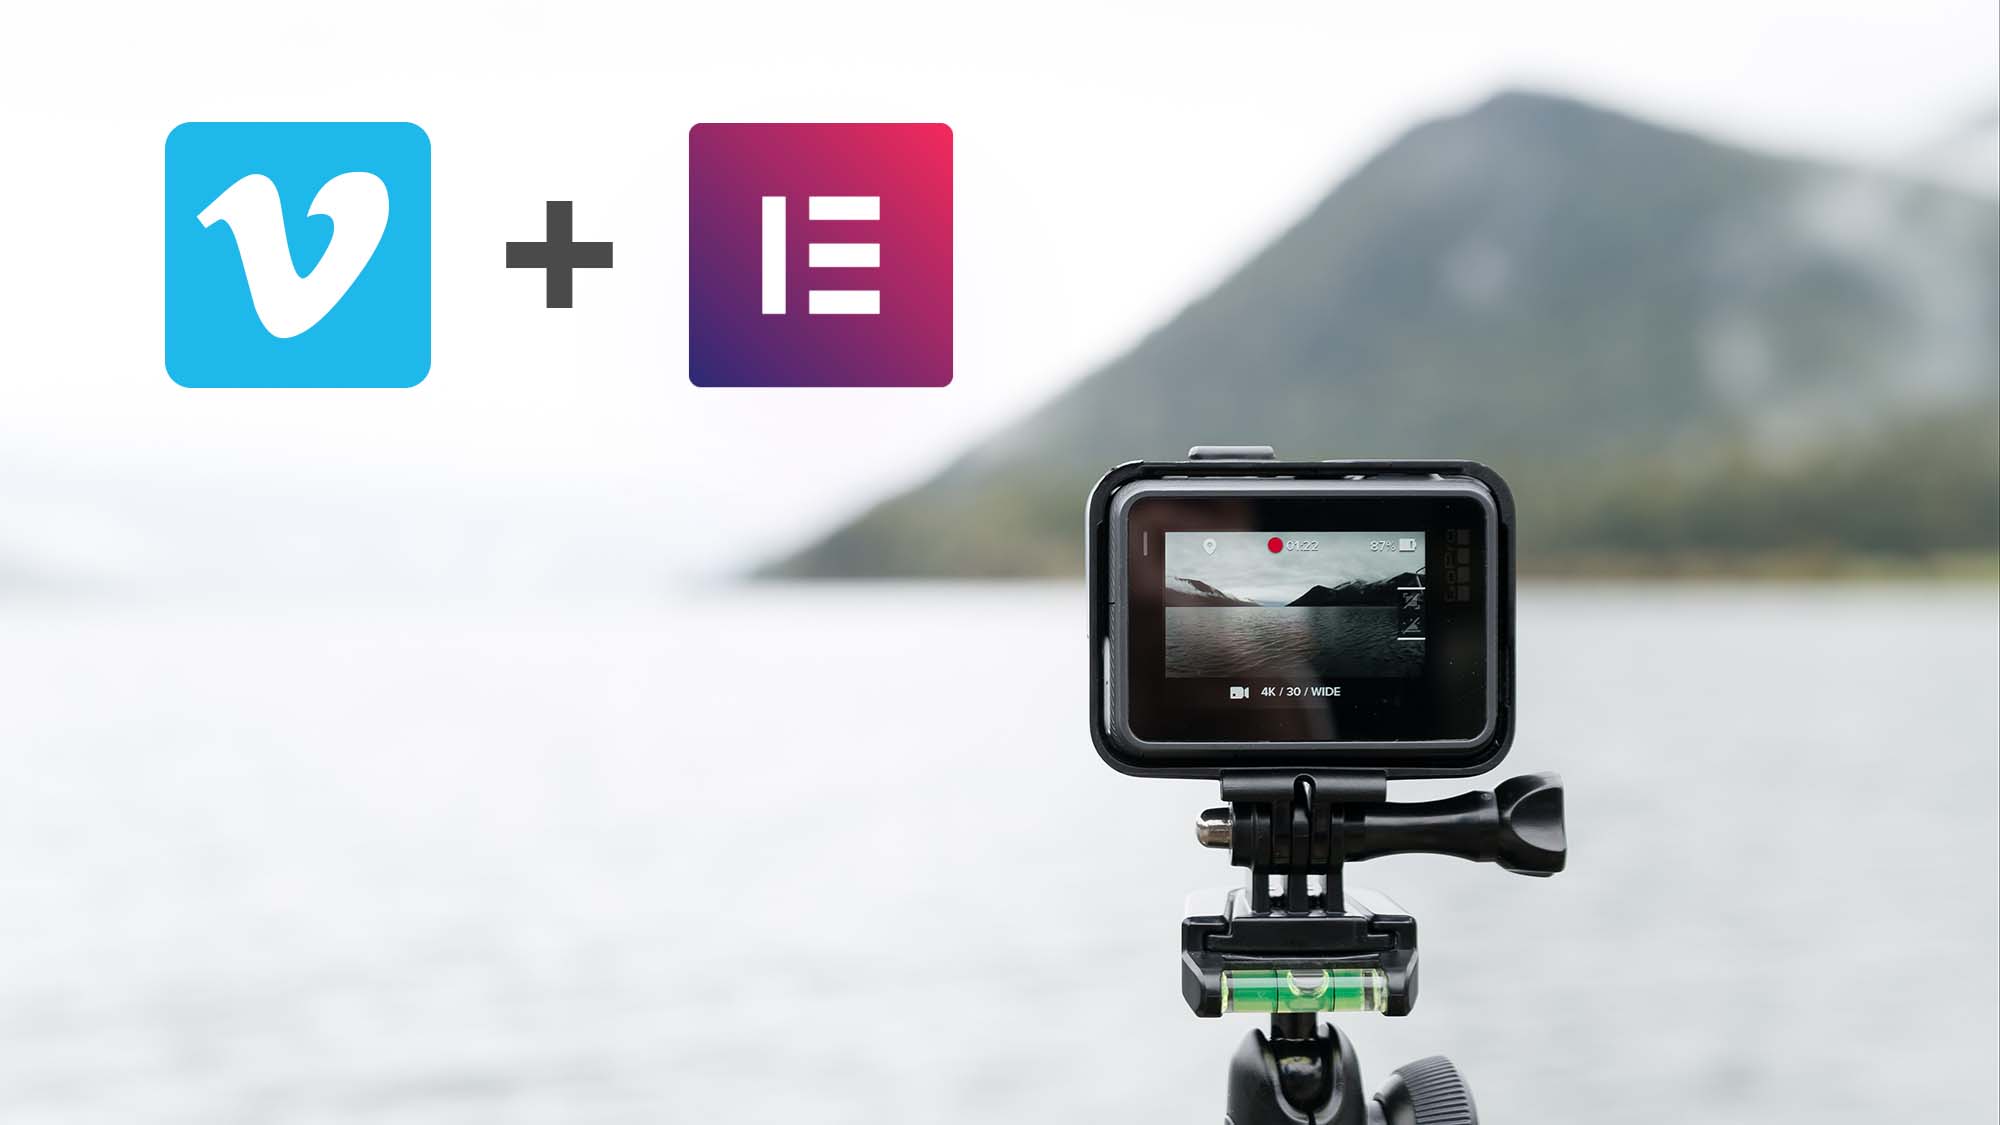 Vimeo and elementor icons next to video camera